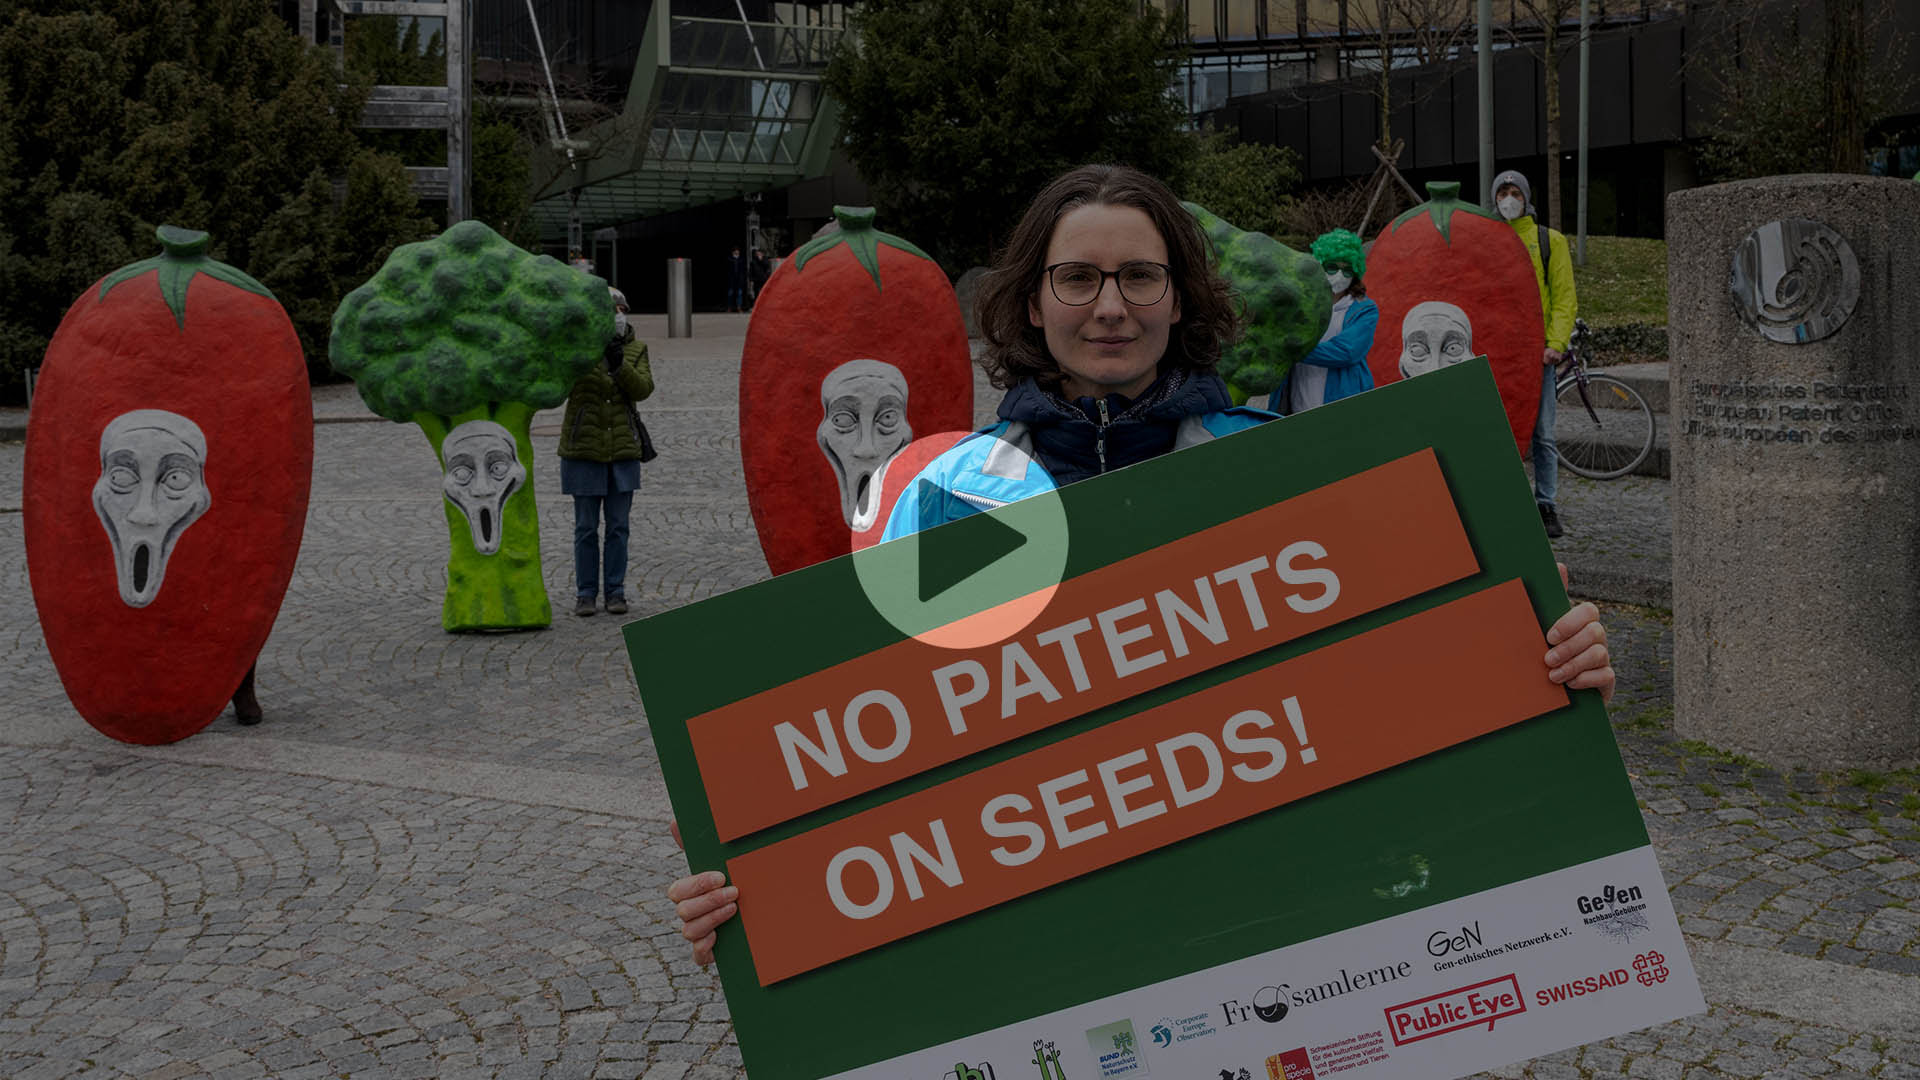 Screenshot of a video, a woman stands in centre with No Patents sign, some people in line behind her dressed as vegetables, play button in centre